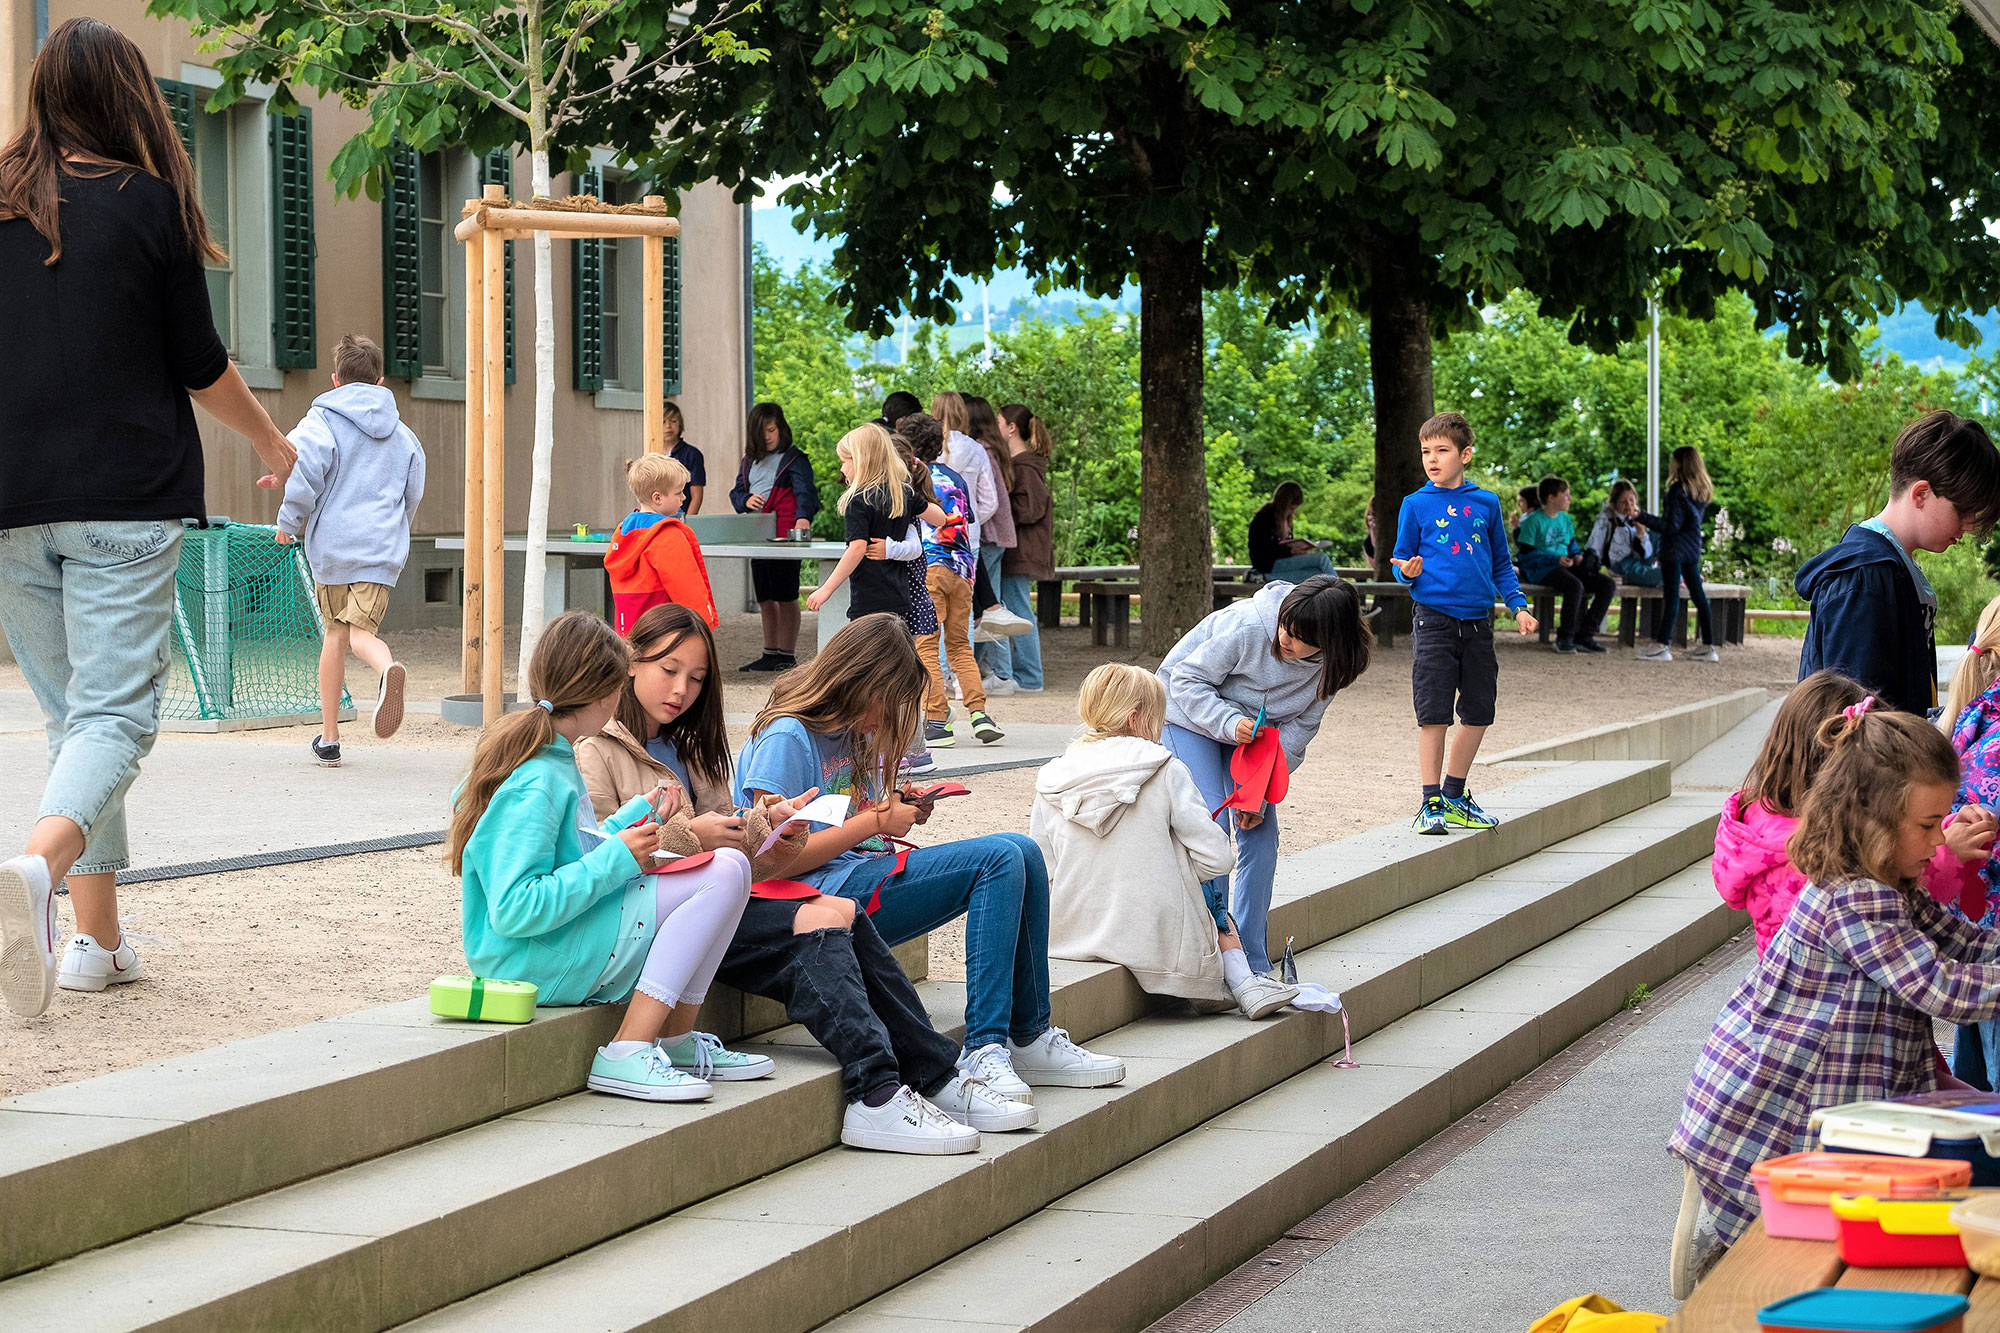 Students sit and play outside on the playground of the school with large, green trees in the background. 	